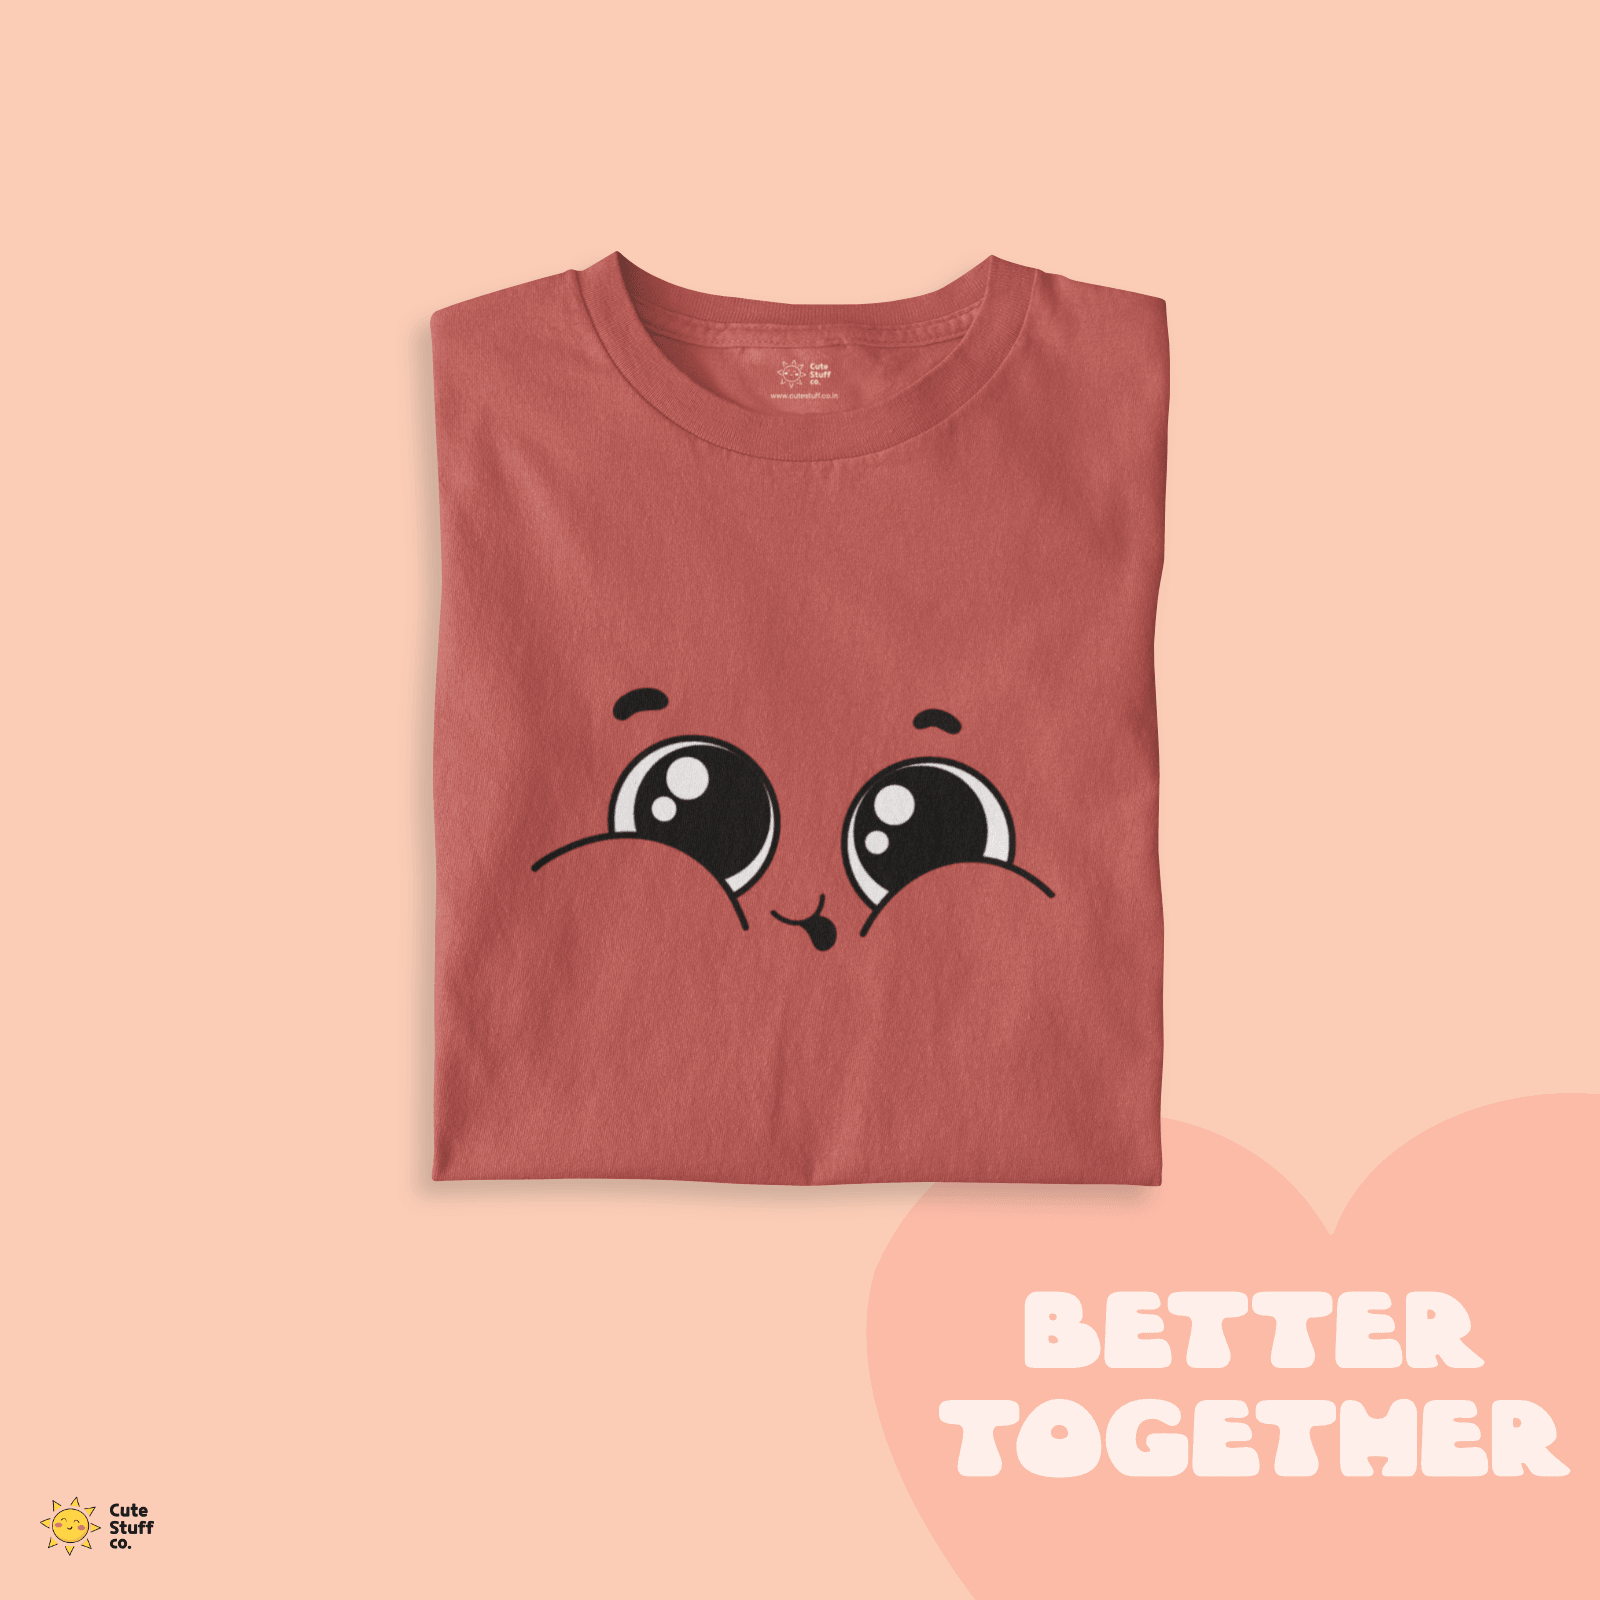 Cheeky Unisex Oversized T-shirts - Better Together - Cute Stuff India